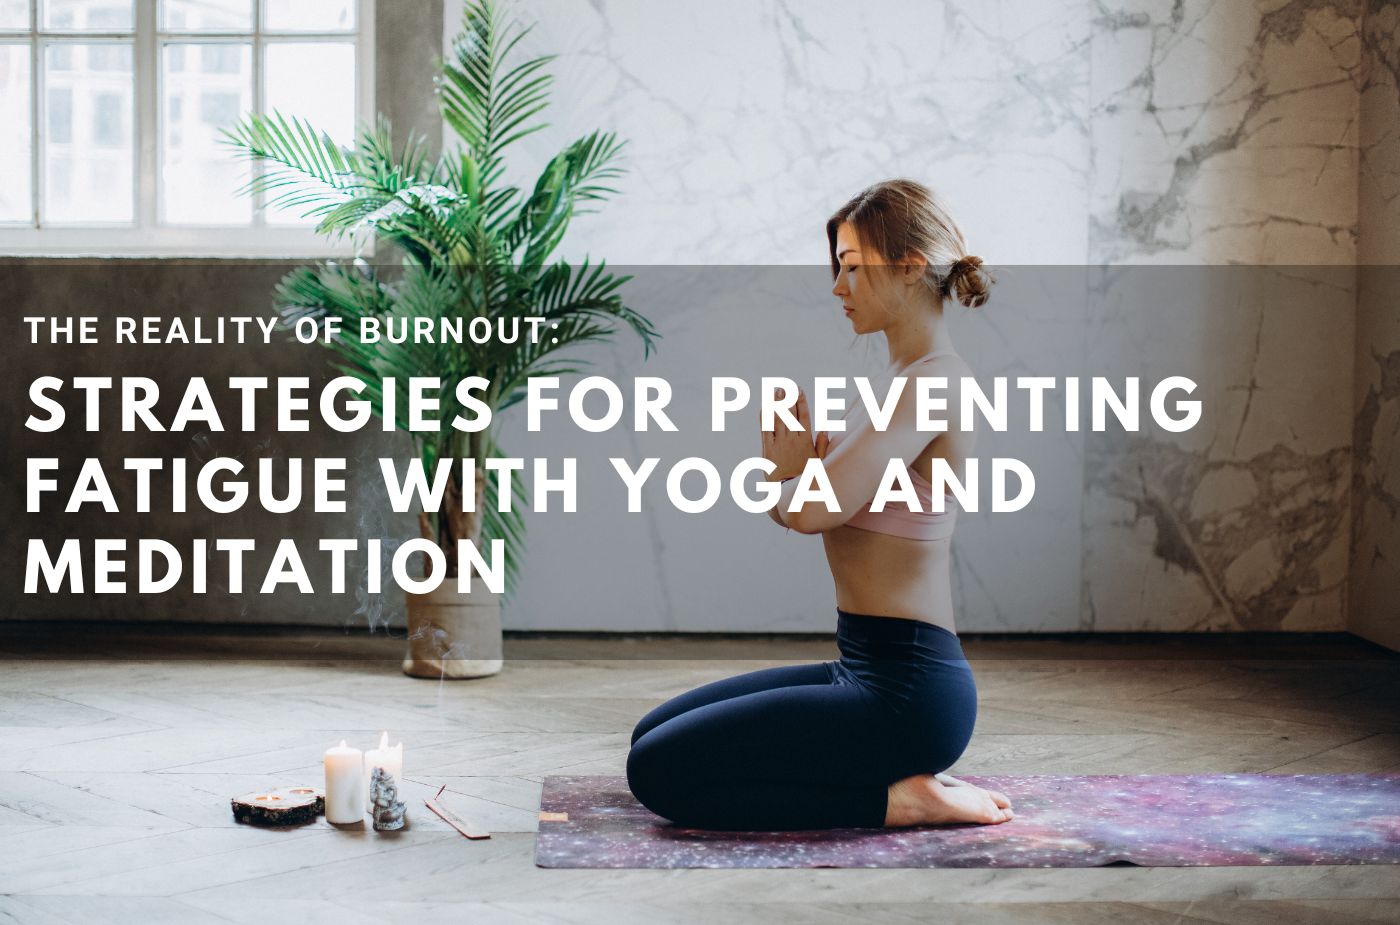 The Reality Of Burnout Strategies For Preventing Fatigue With Yoga and Meditation